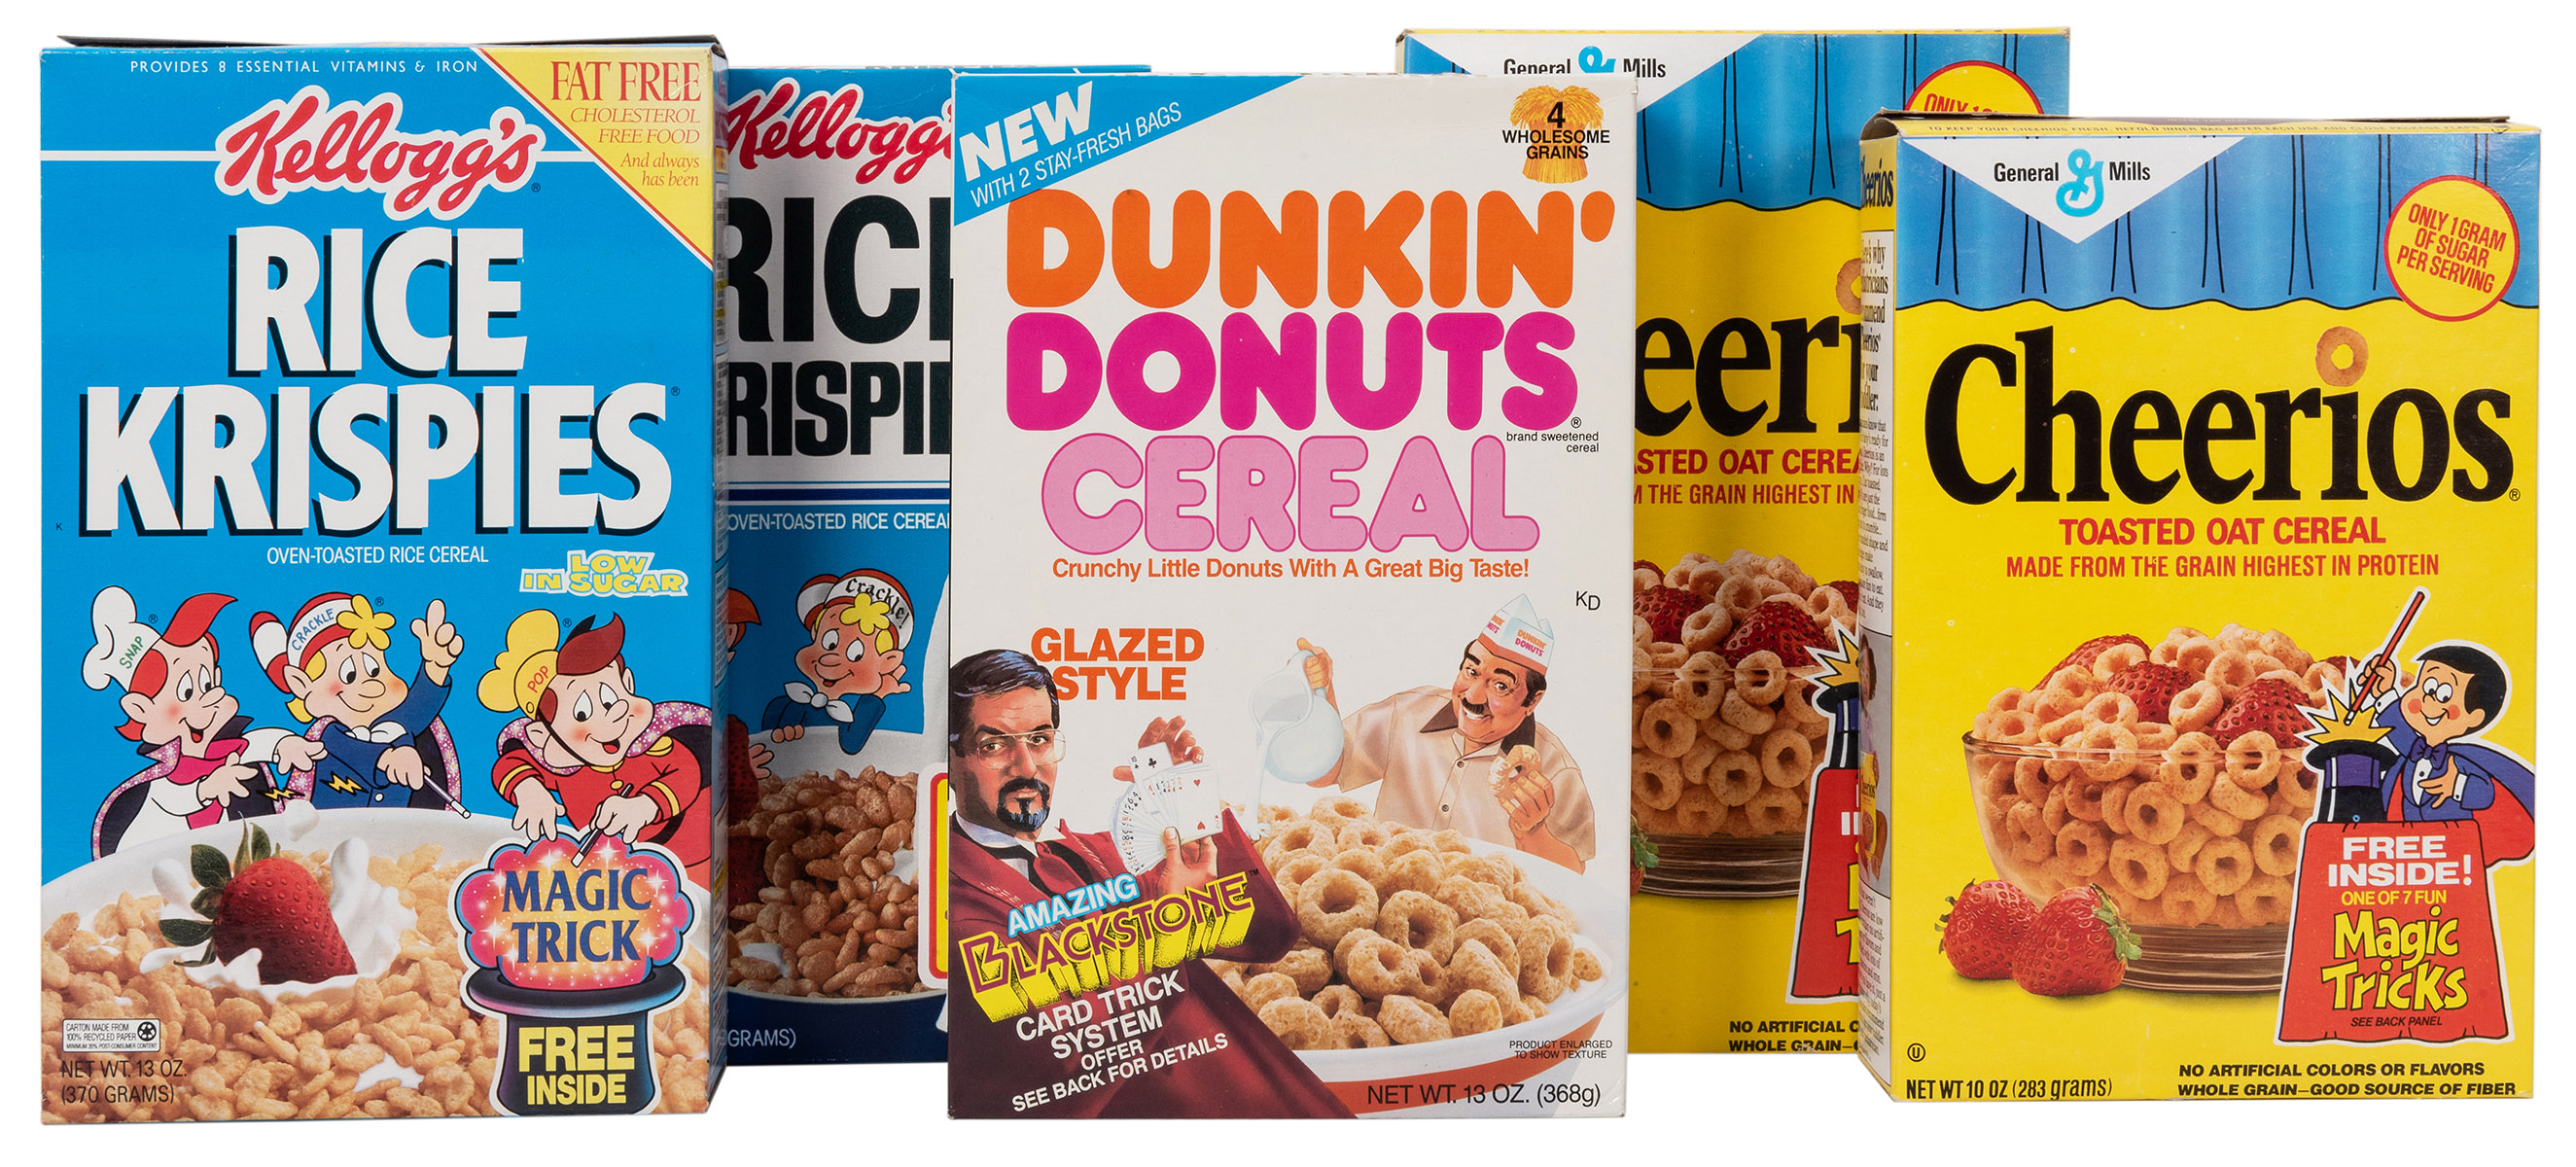 Custom Cereal Boxes, 44% OFF | www.kleinerlawgroup.com